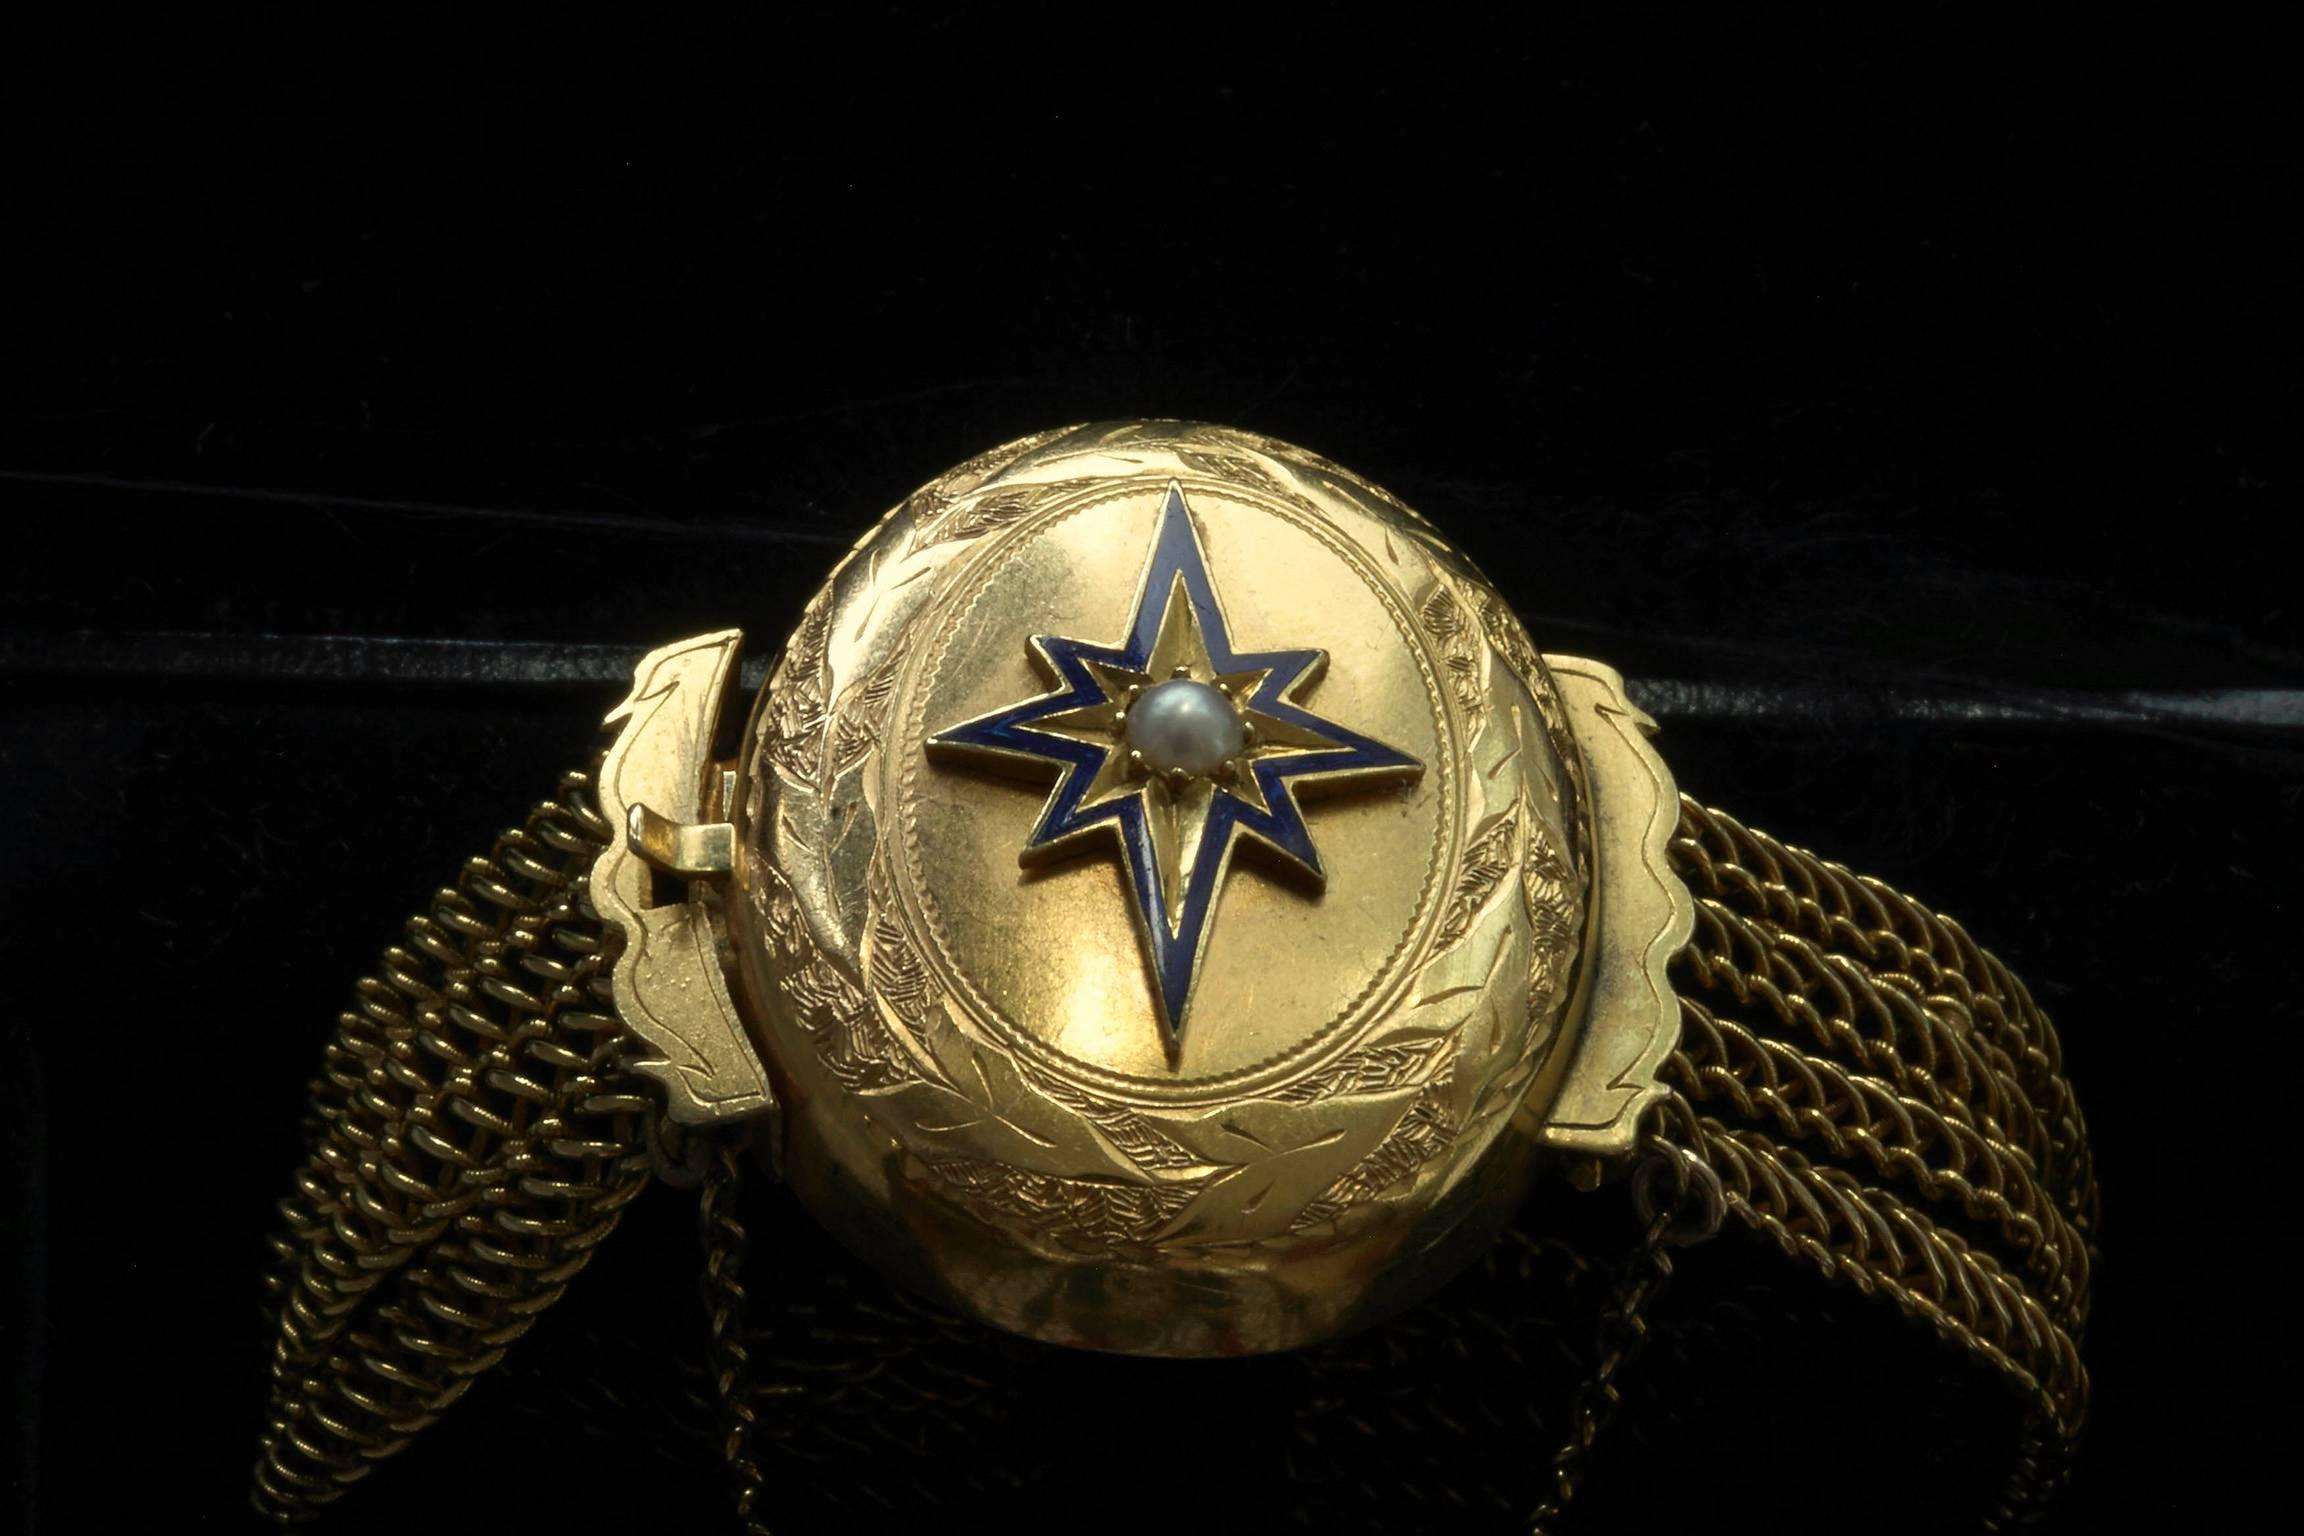 C.1880. An amazingly handsome late Victorian bracelet with a hidden glass locket on the back. The locket is connected to four loose gold chains on each side. The hidden locket currently contains two locks of hair, but it can easily be removed if